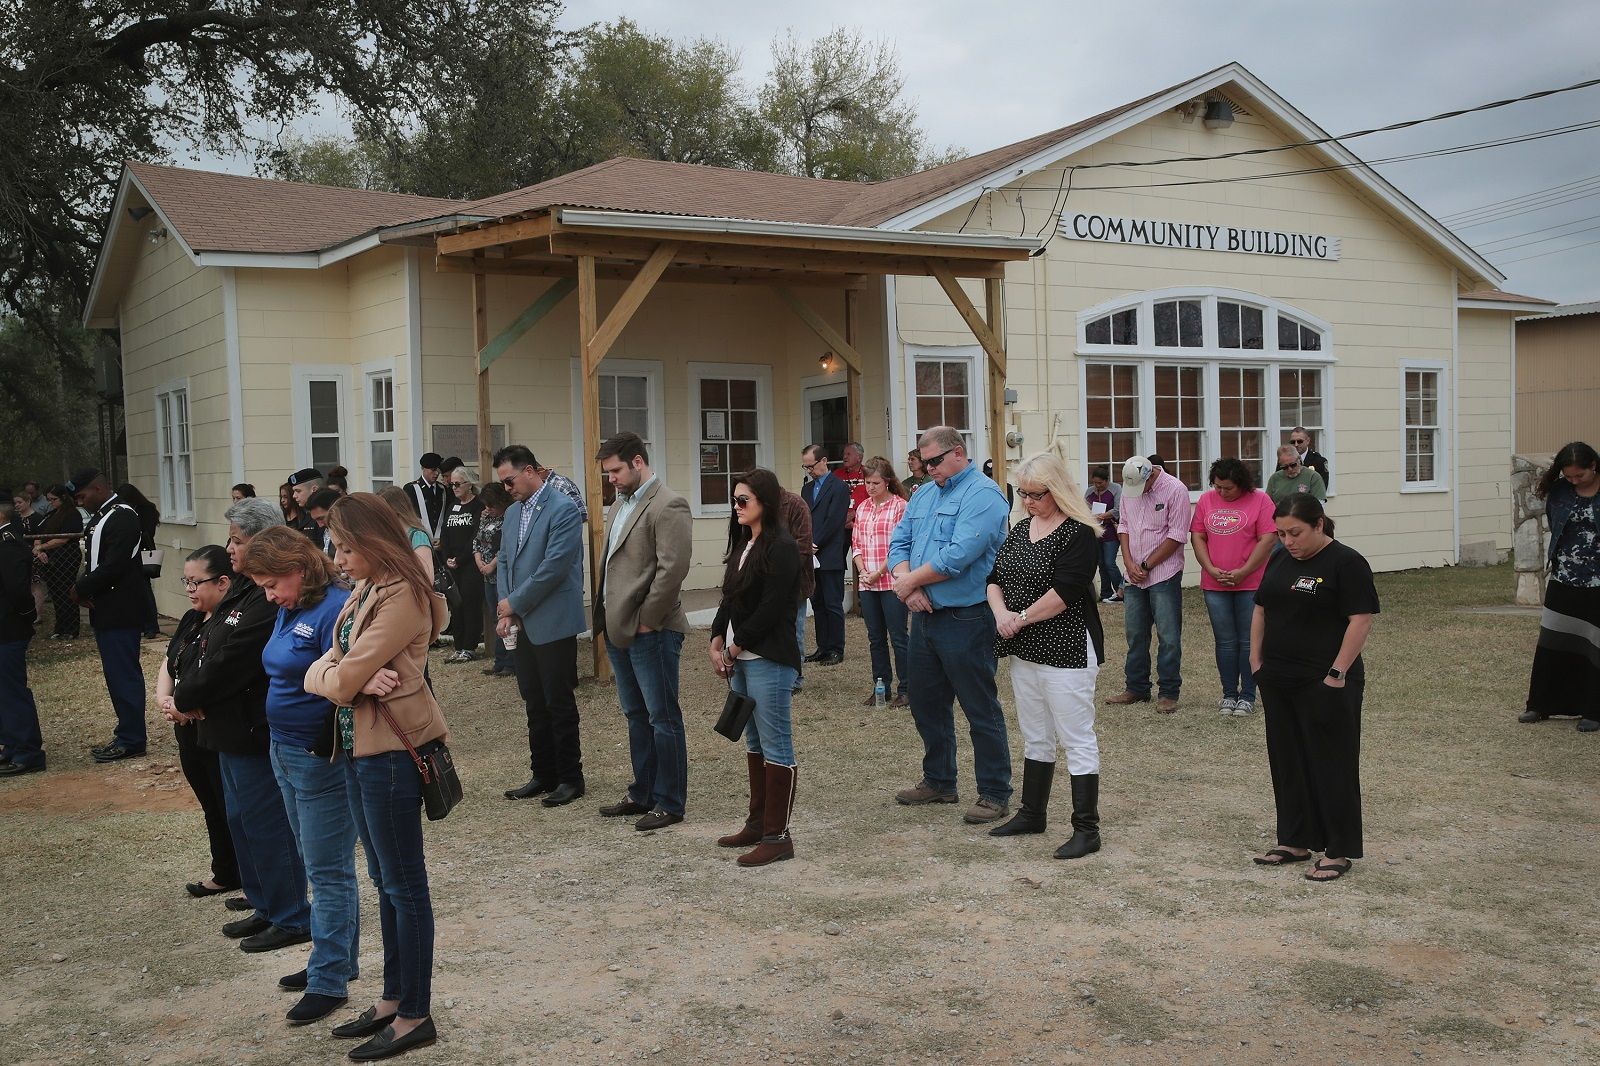 SUTHERLAND SPRINGS, TX - NOVEMBER 11: Residents and visitors share a prayer during a Veterans Day ceremony outside the Community Center on November 11, 2017 in Sutherland Springs, Texas. Residents of the community are still trying to heal following the shooting at the First Baptist Church of Sutherland Springs on November 5. Devin Patrick Kelley shot and killed 26 people and wounded 20 others when he opened fire during Sunday service at the church.  (Photo by Scott Olson/Getty Images)